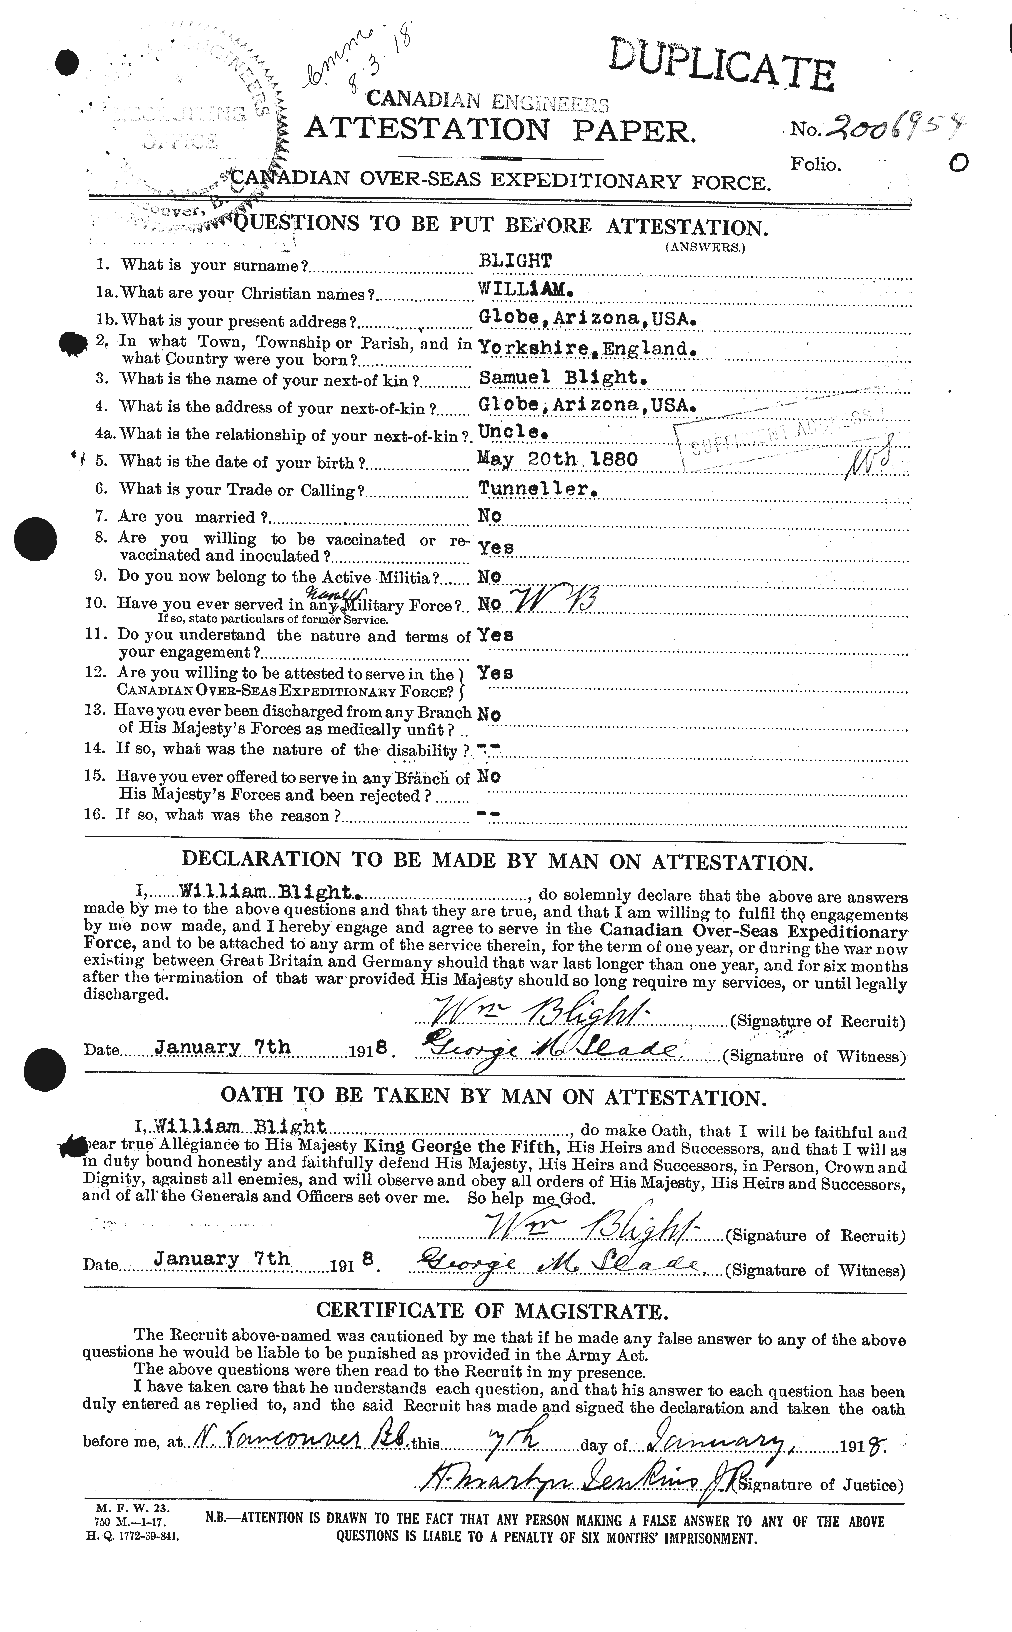 Personnel Records of the First World War - CEF 248097a